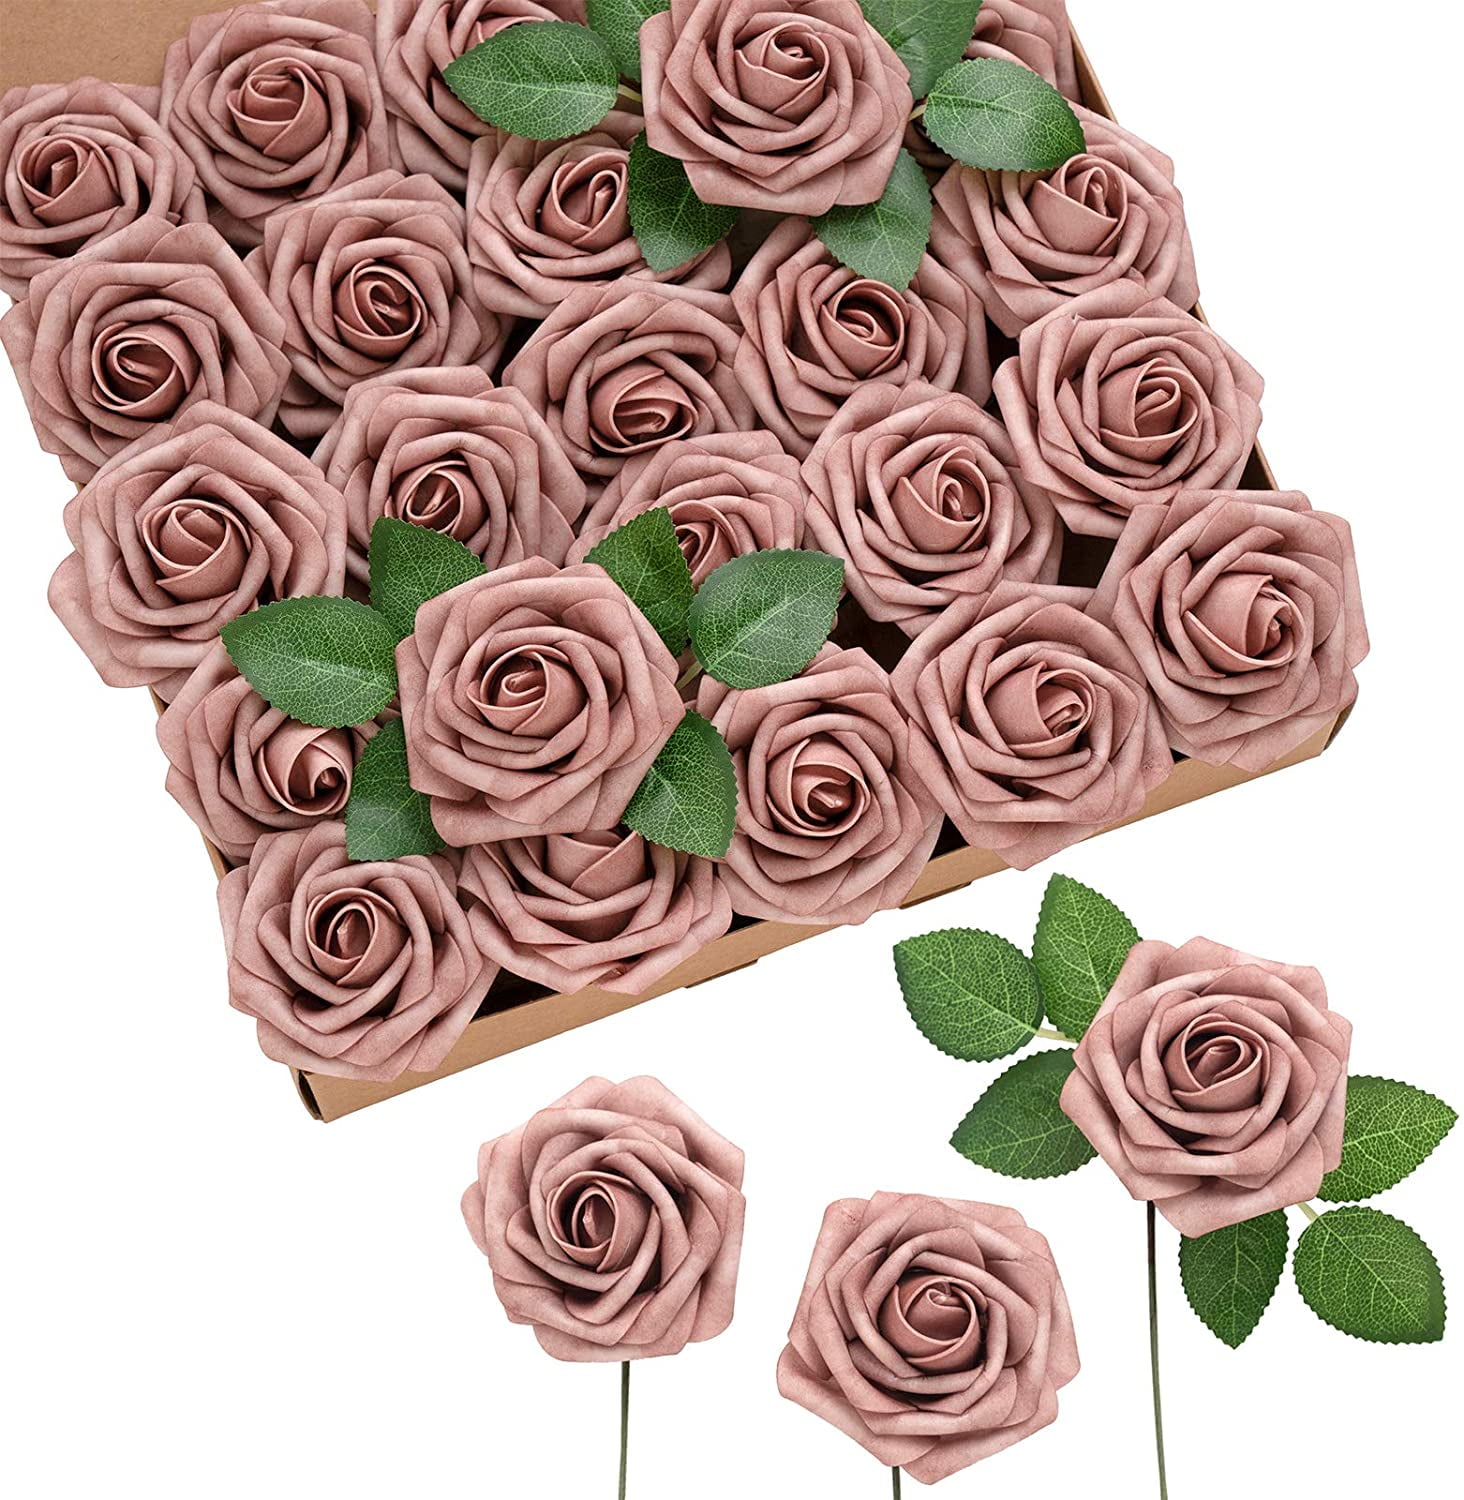 Ling&39s Moment Roses Artificial Flowers 25pcs Realistic Dusty Fake Stem For DIY 